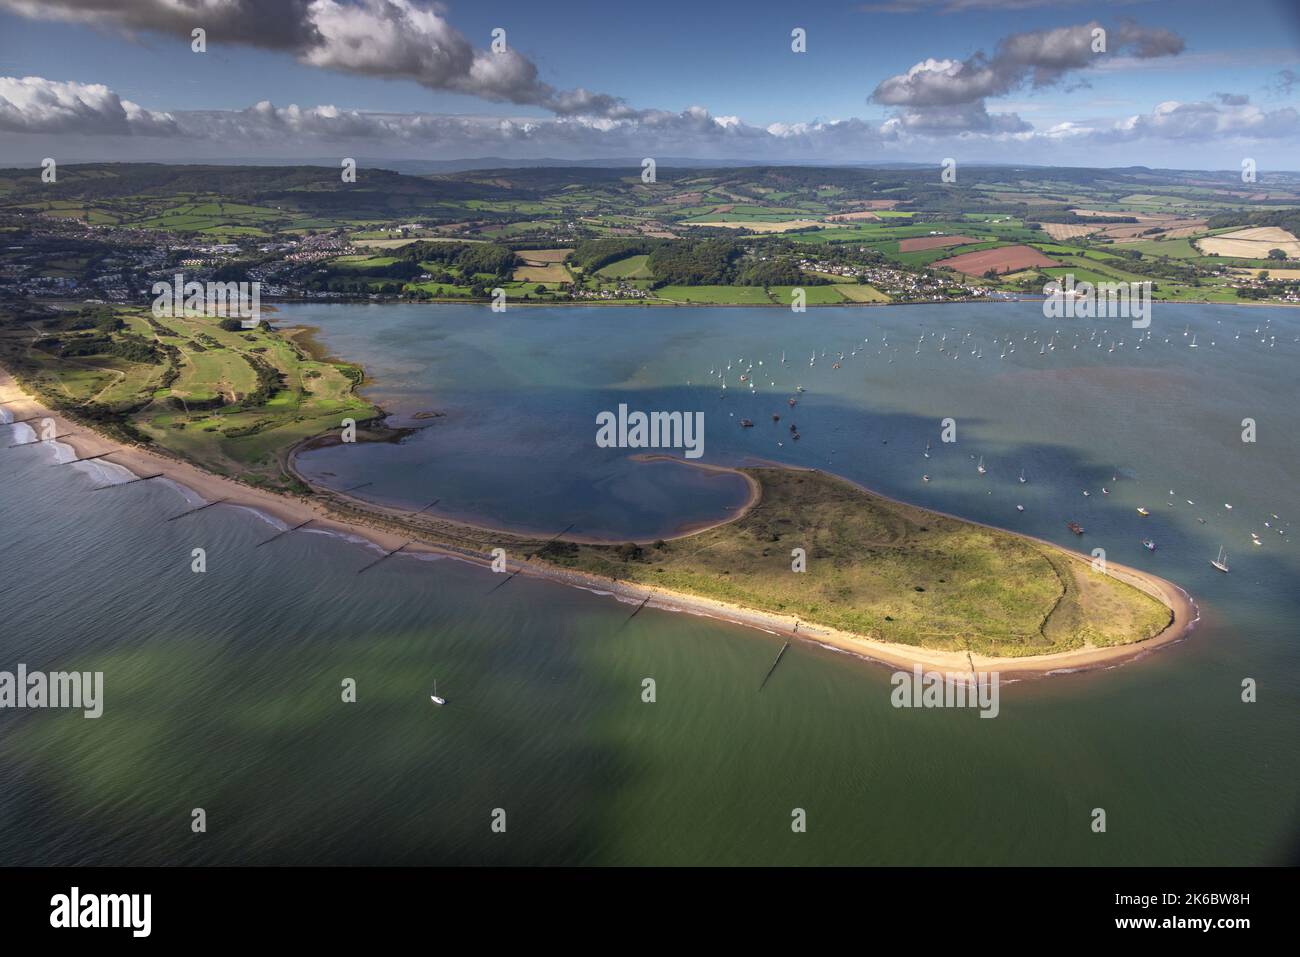 Aerial photograph of Dawlish Warren Spit, located at the mouth of the River Exe with the Devon coastline and Dartmoor in the background. Stock Photo